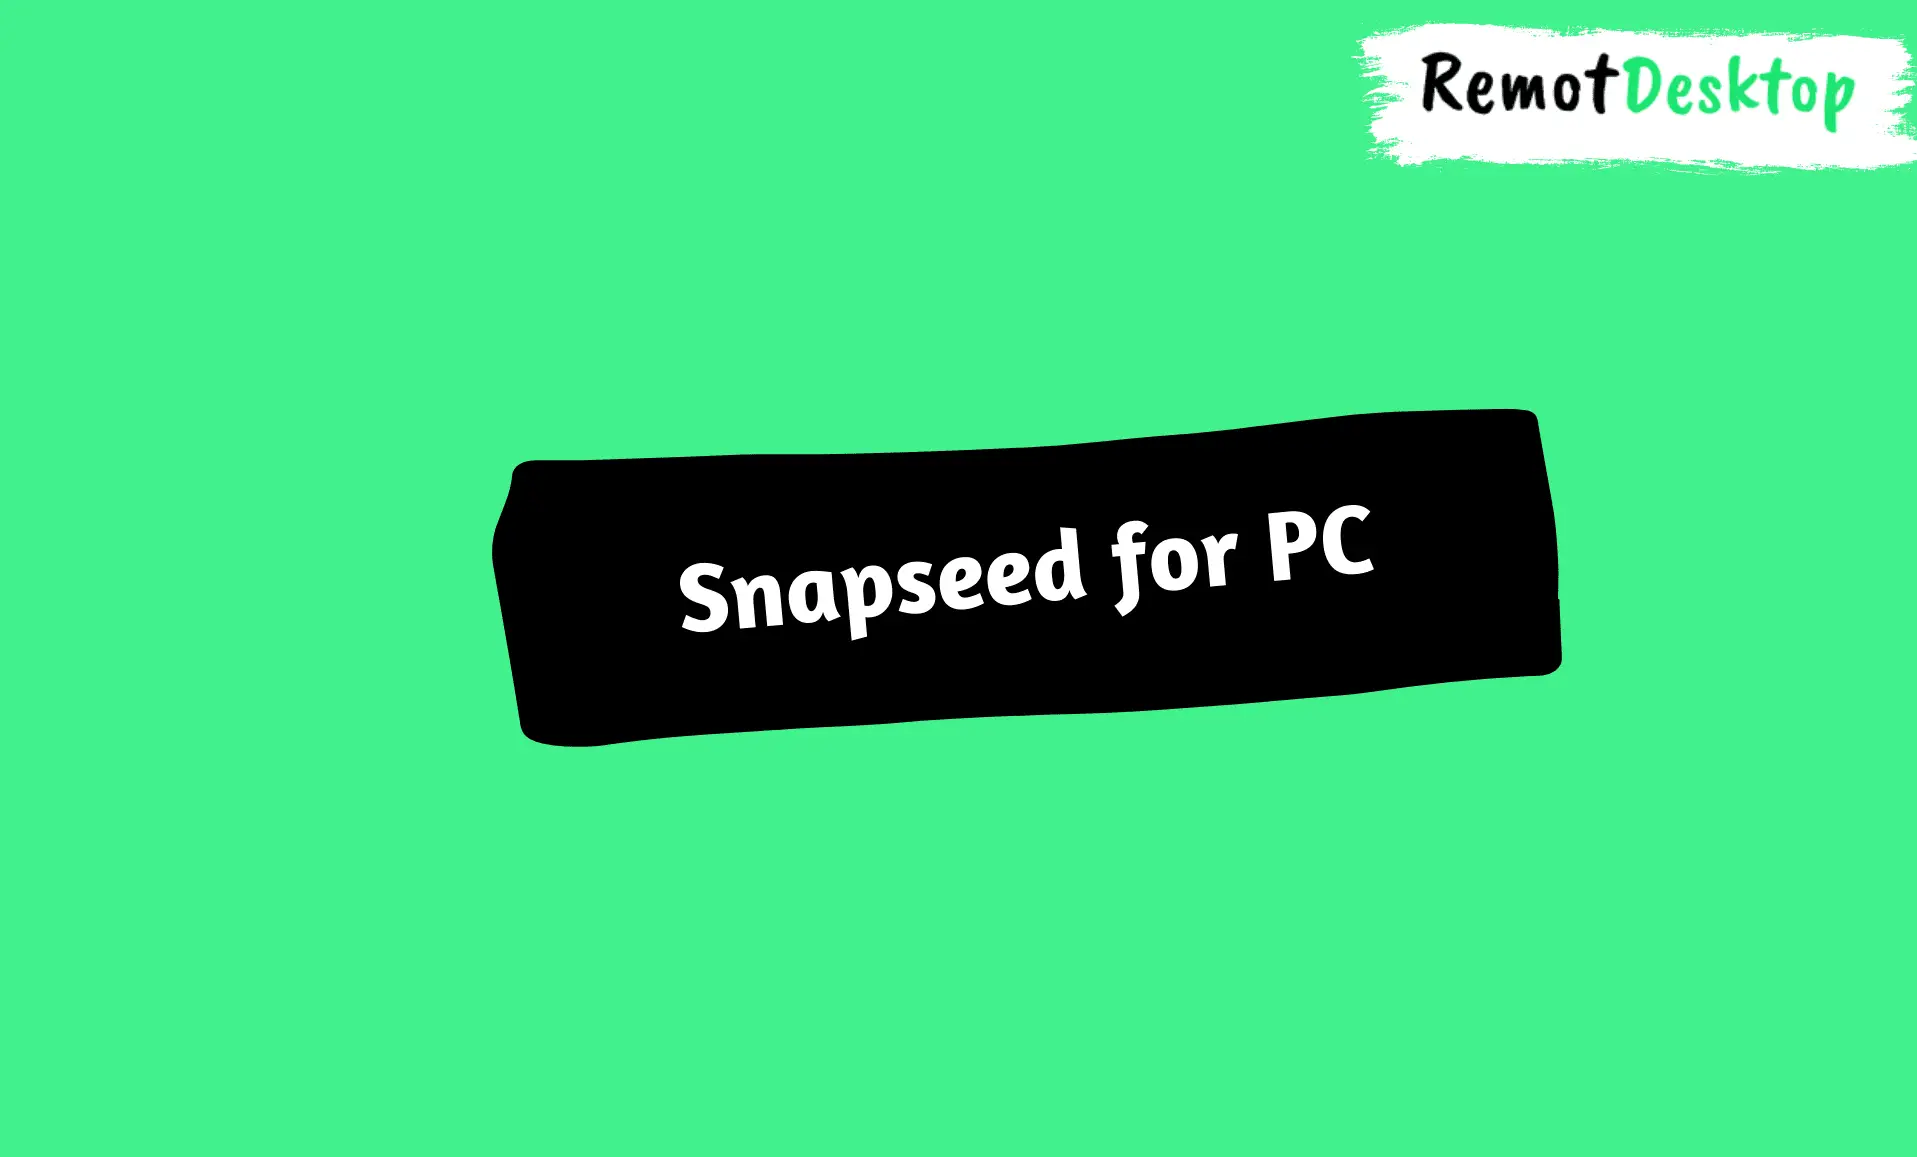 How to Install Snapseed on Windows